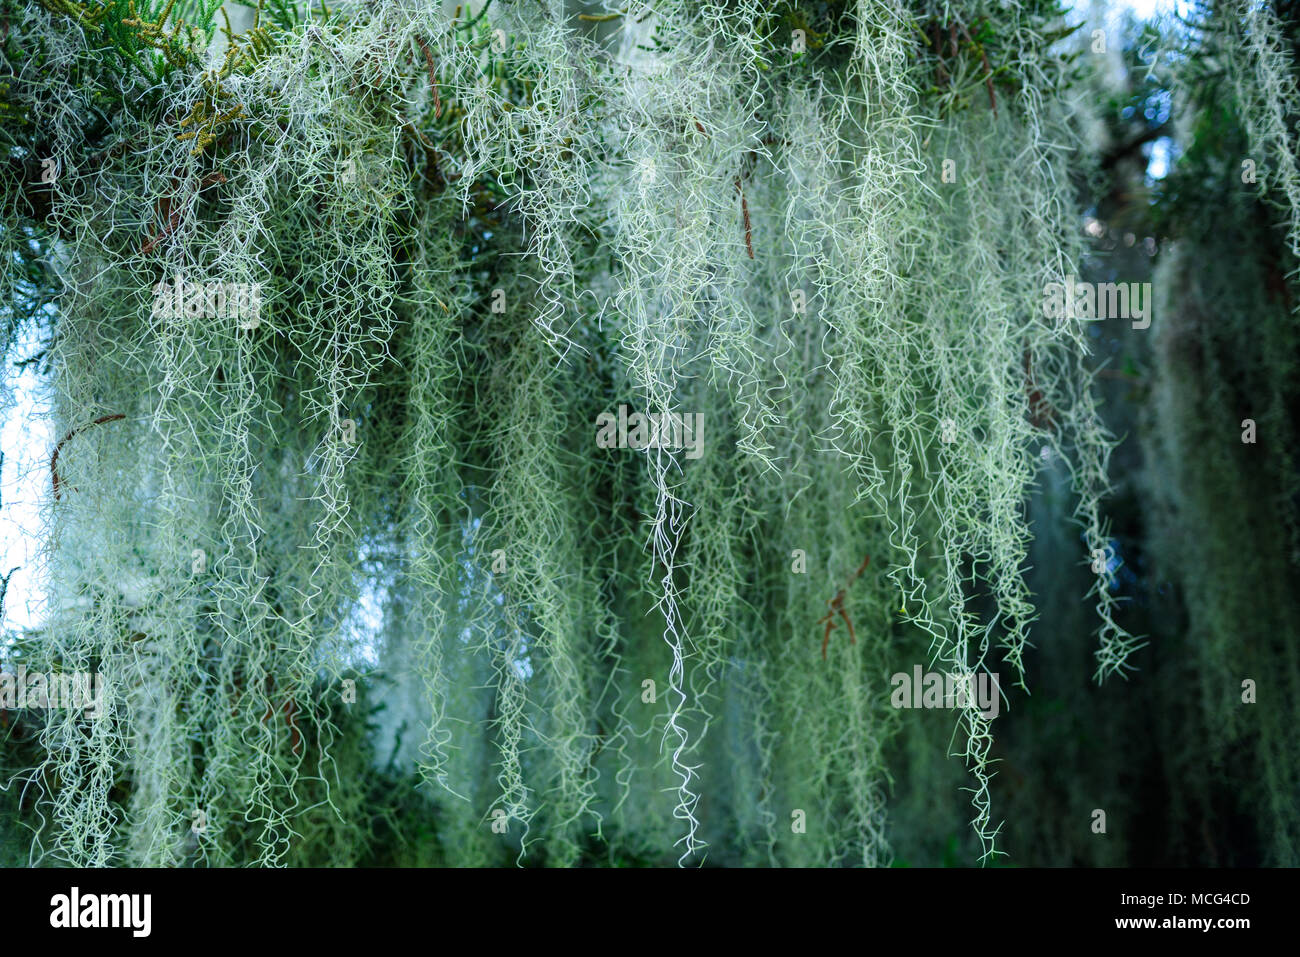 Spanish Moss hanging from branches of a Norfolk pine tree Stock Photo